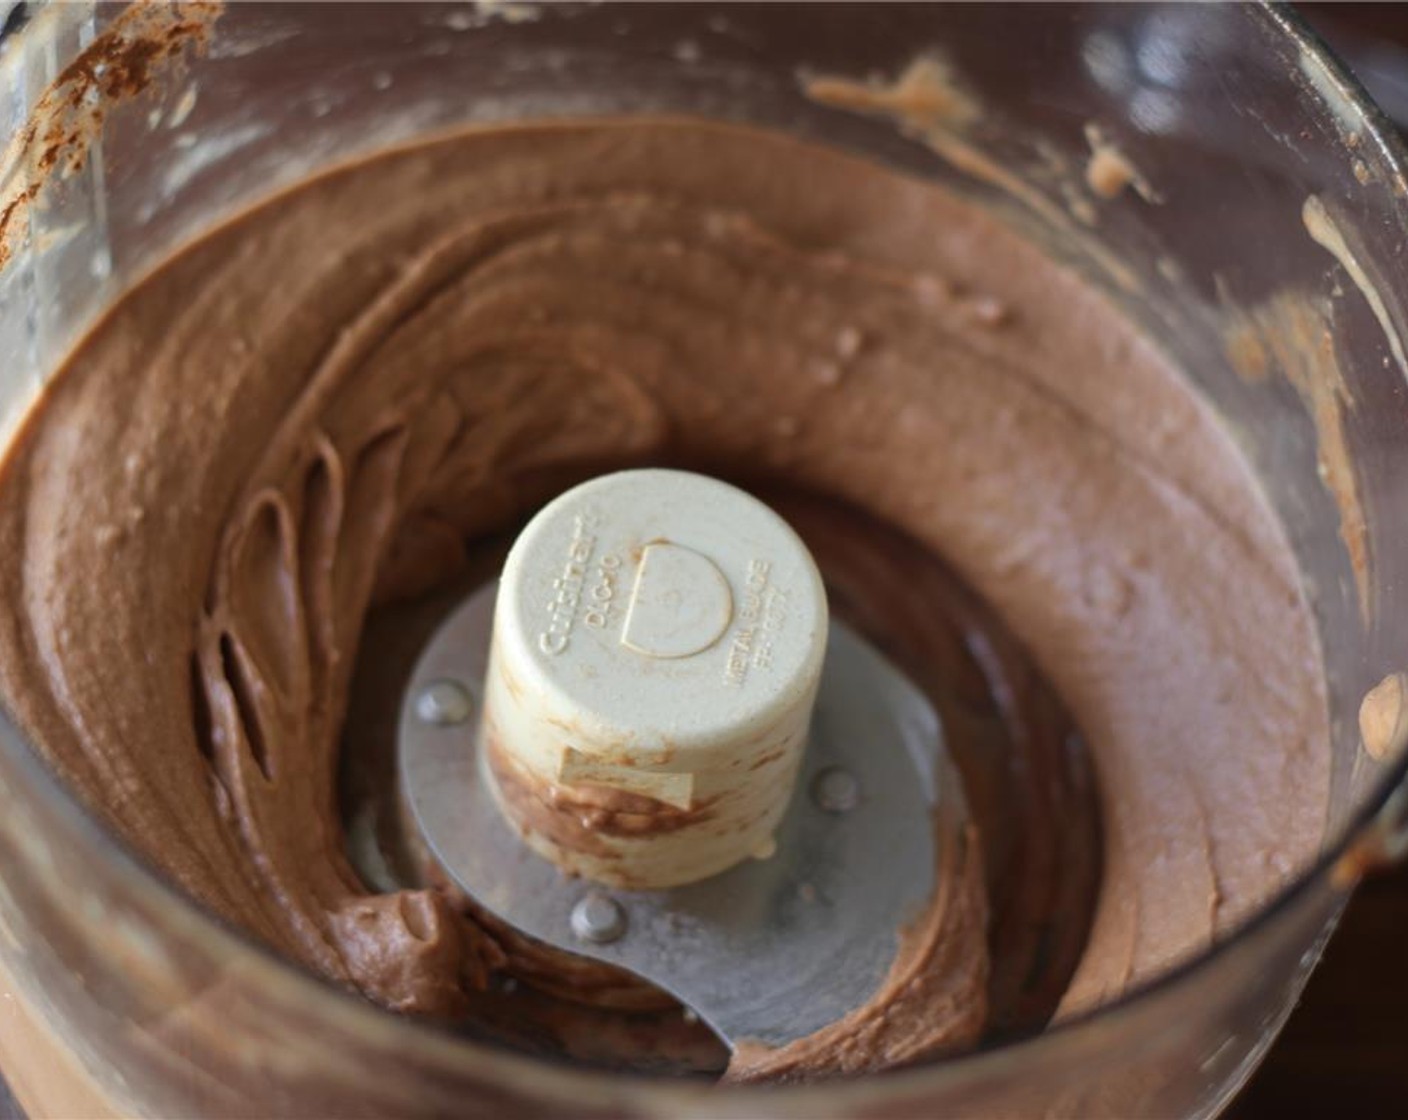 step 2 Add the Peanut Butter (2 Tbsp), Unsweetened Cocoa Powder (1 Tbsp), and Honey (1 Tbsp) and blend until smooth.